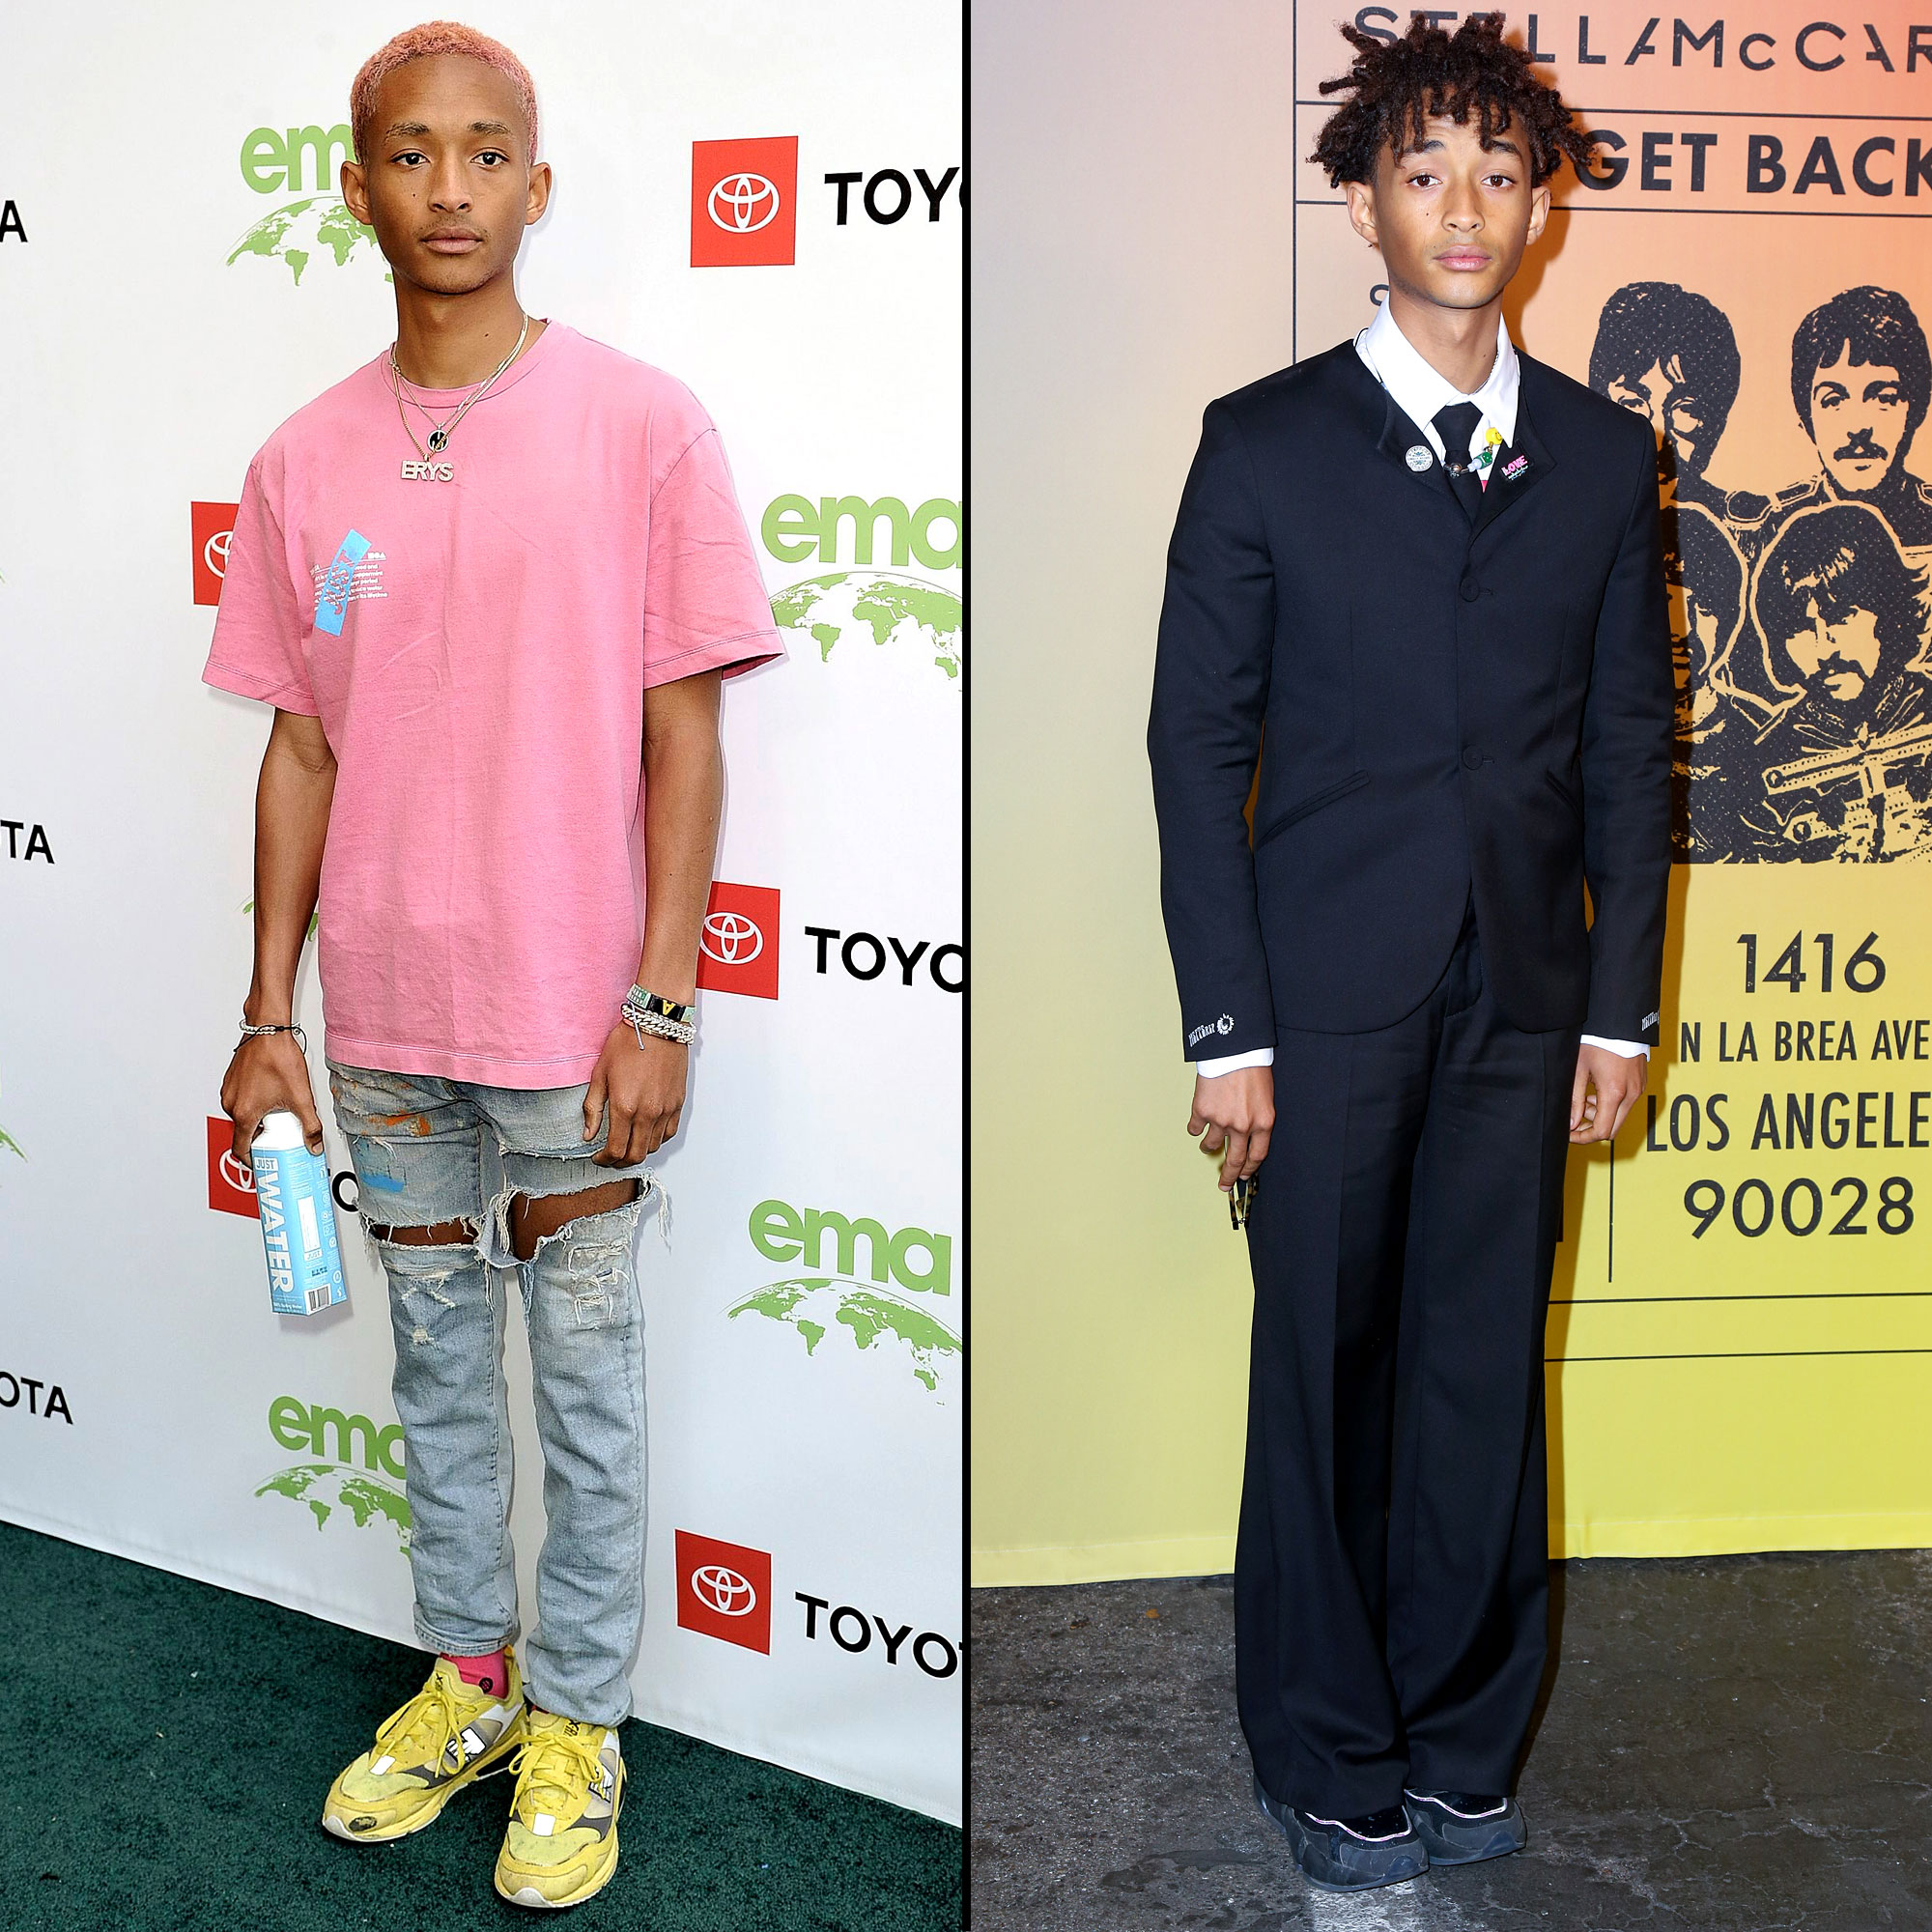 Jaden Smith Hits Back At Body Transformation 'Haters